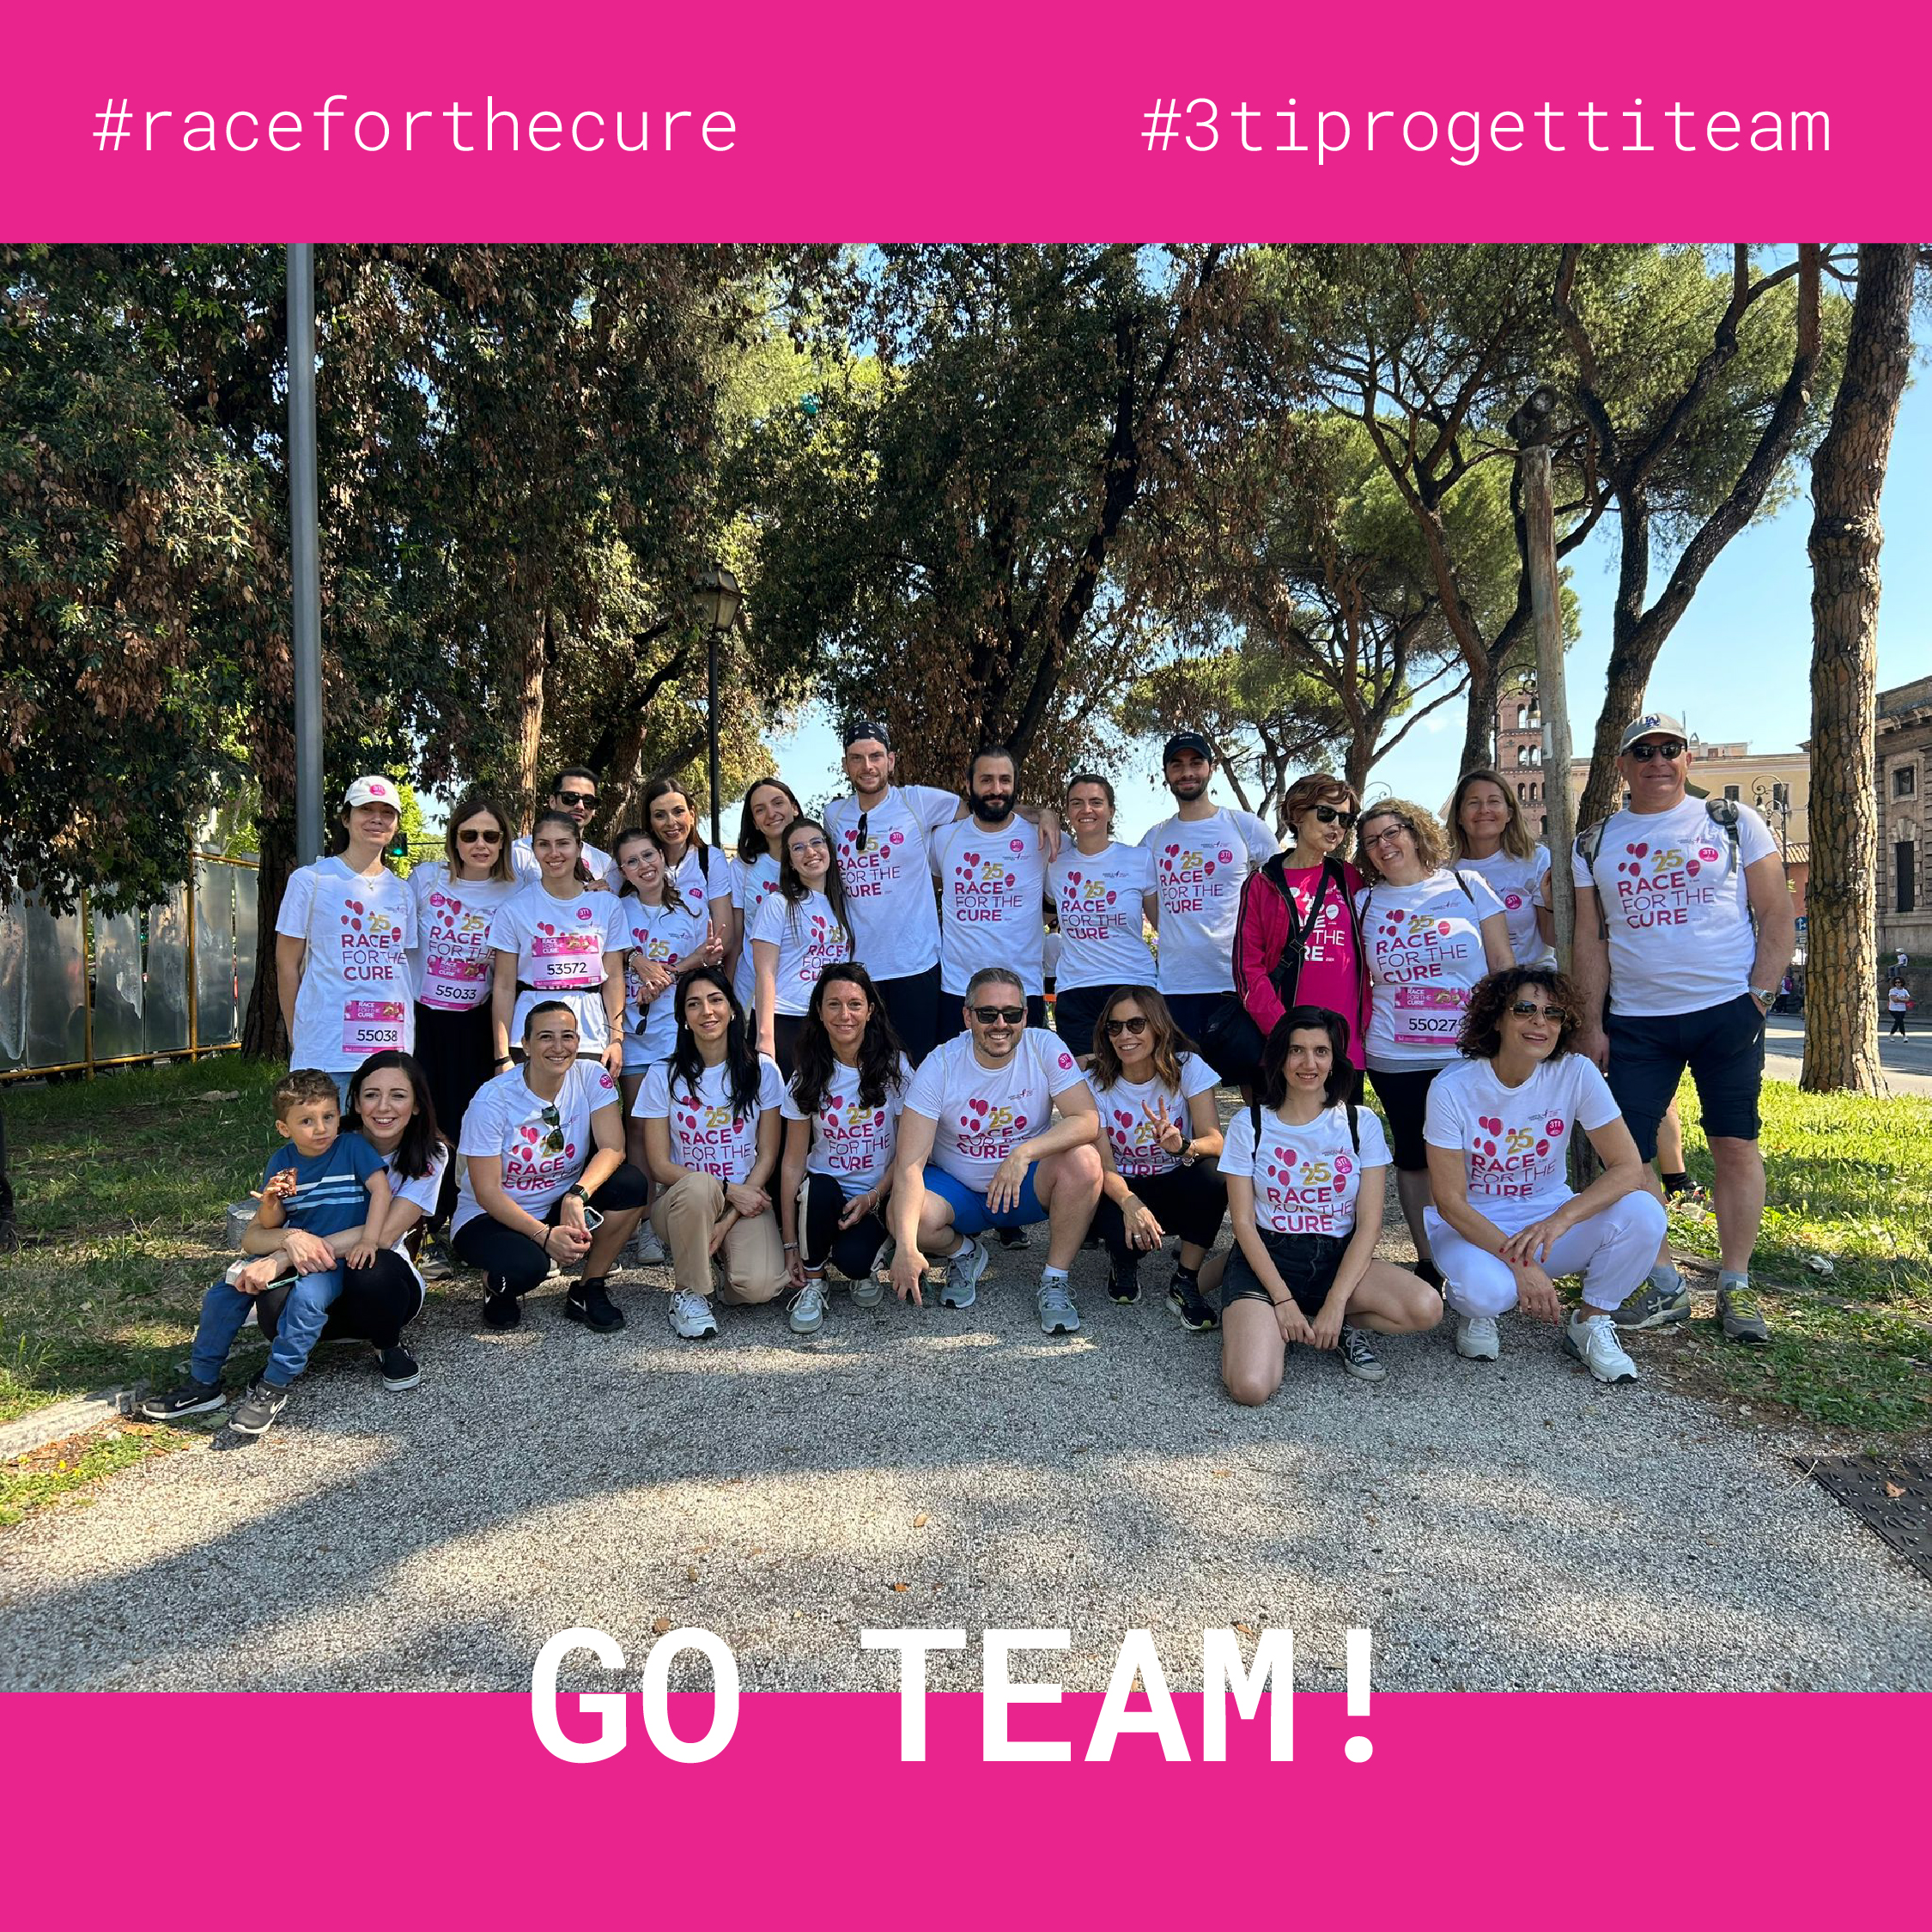 3TI at Race for the cure